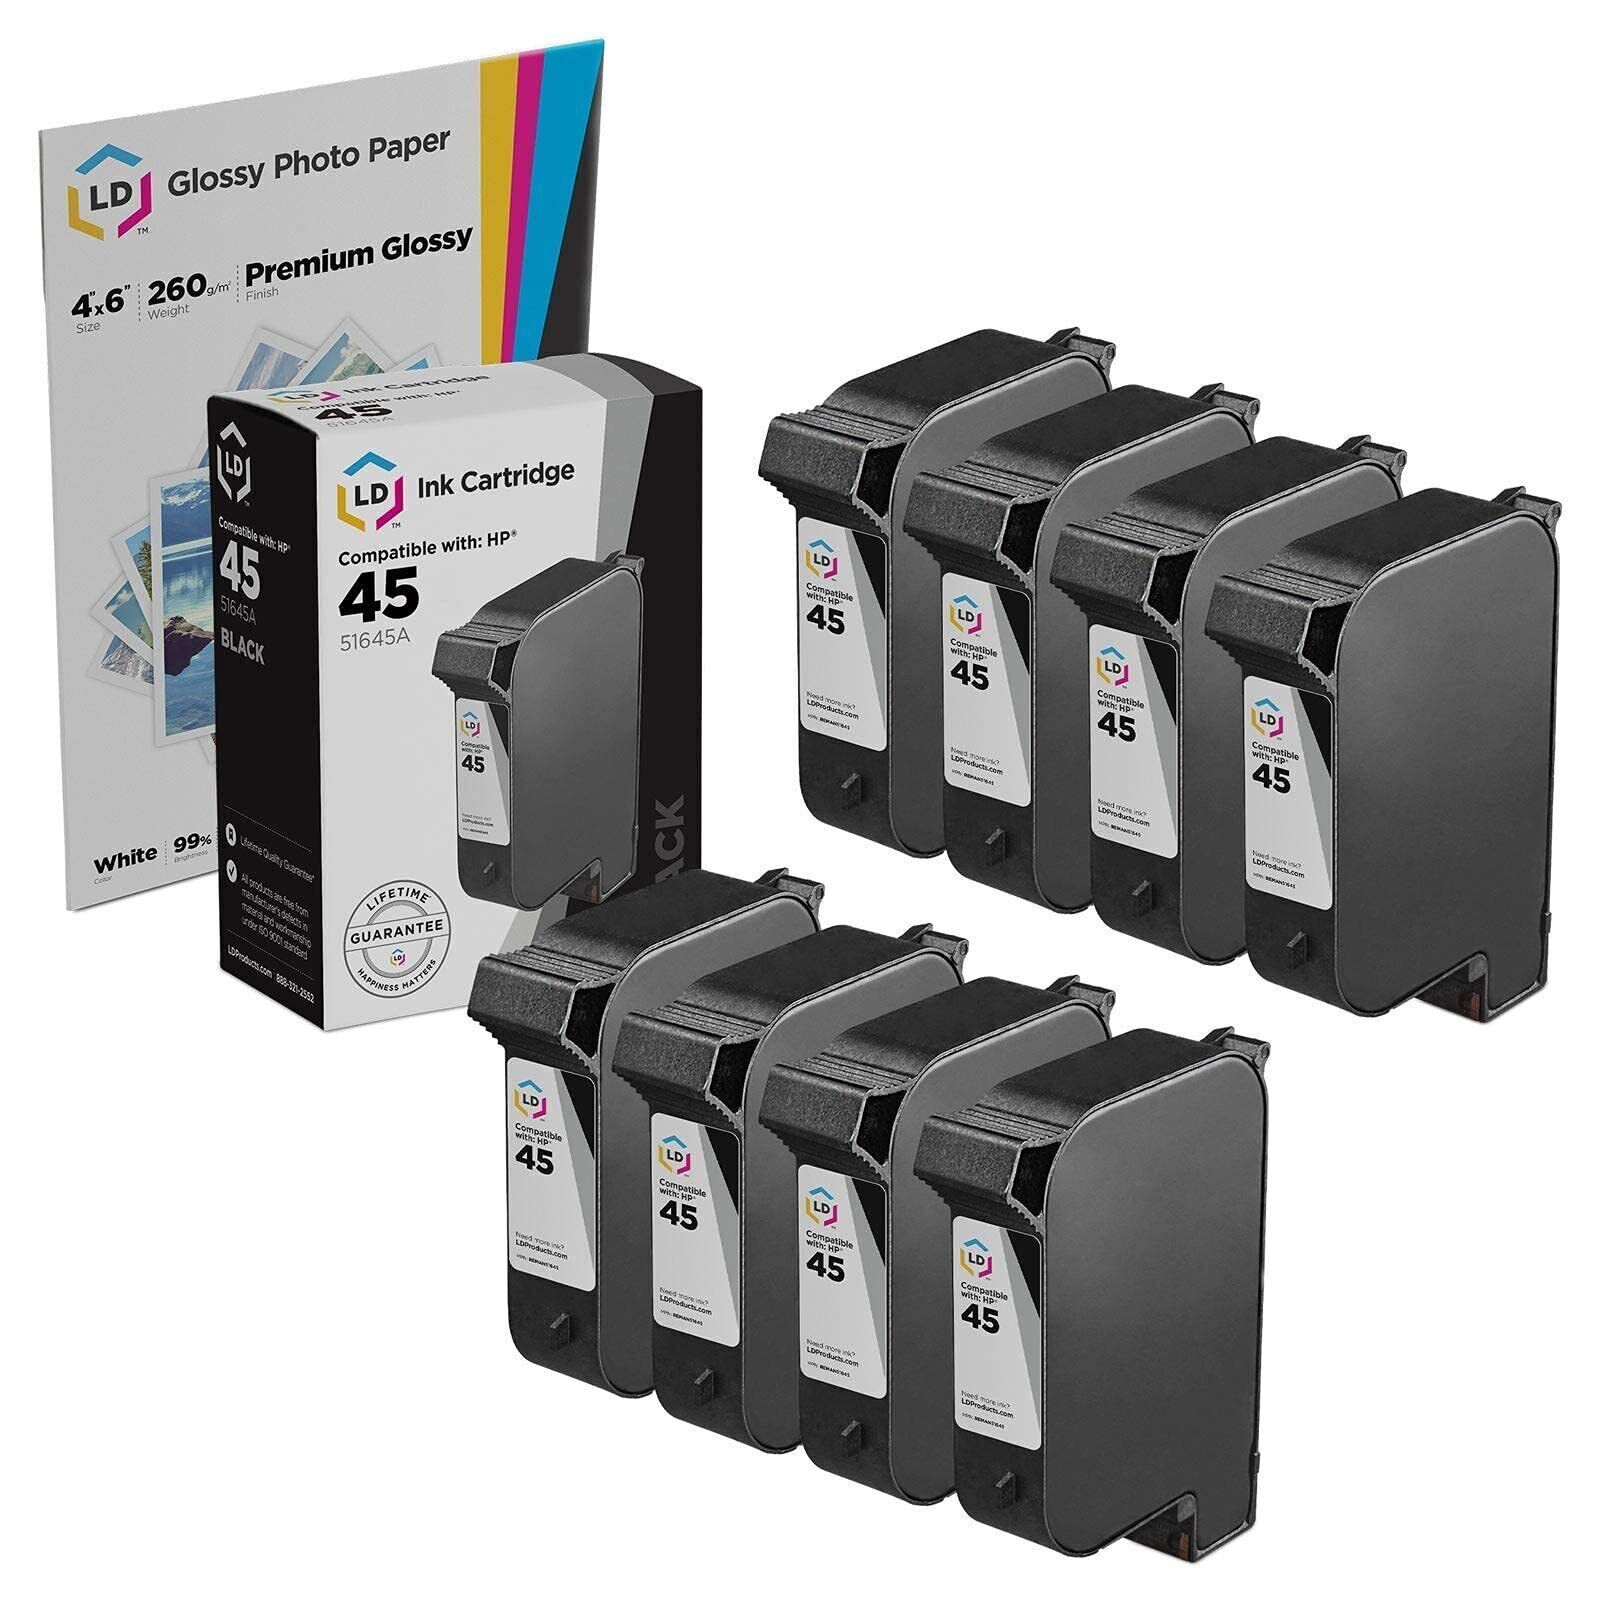 LD Reman Replacement Ink Cartridges for HP 51645A (HP 45) Set of 8 Black